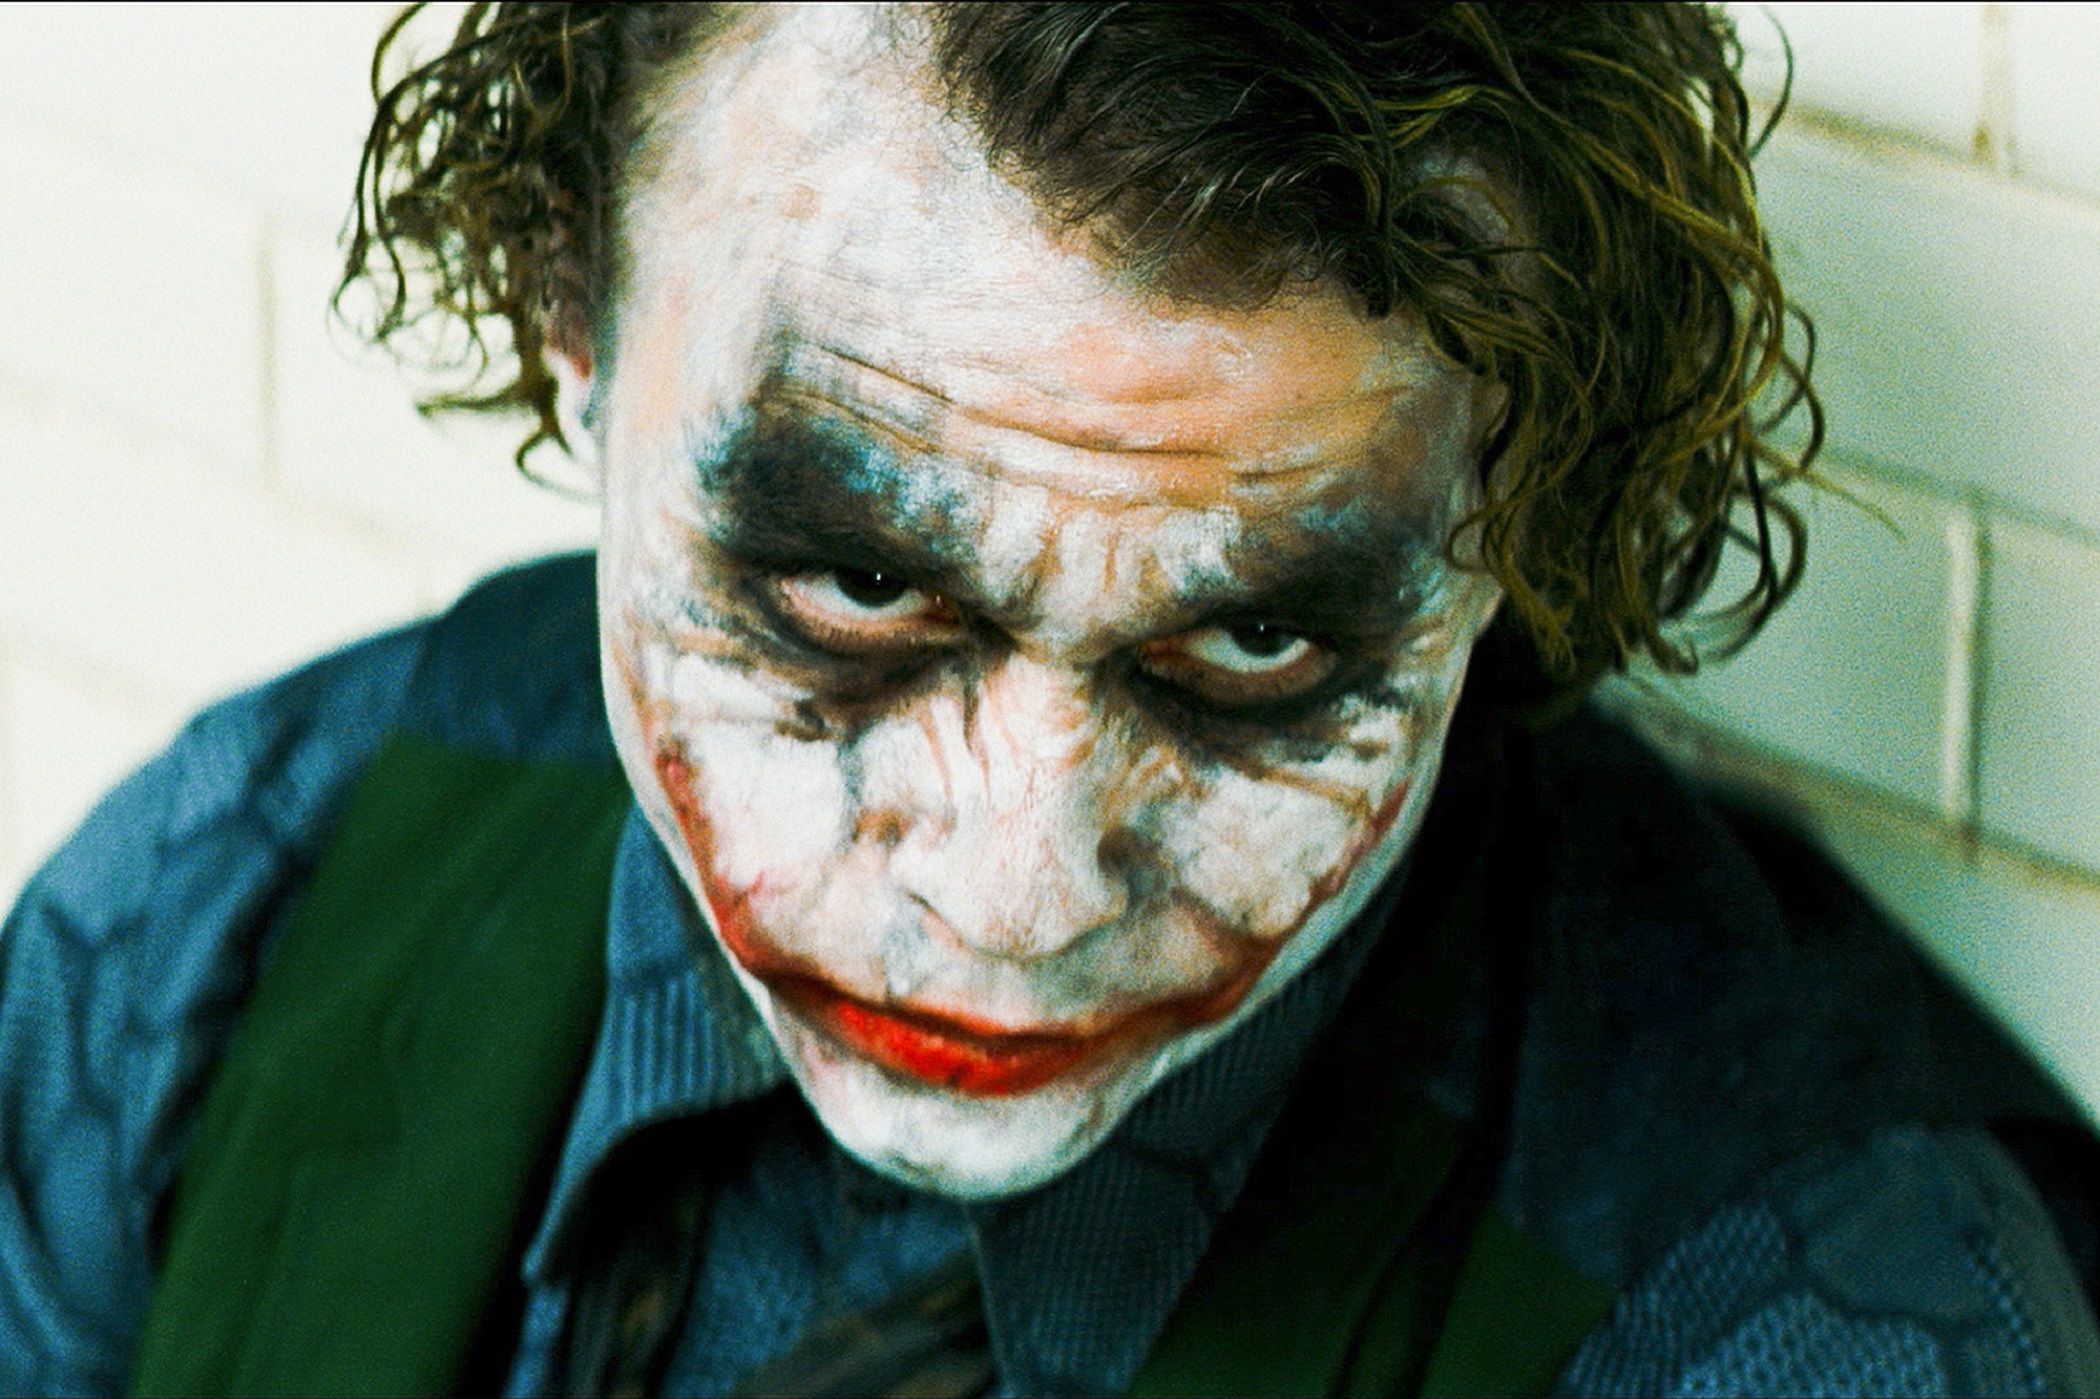 Heath Ledger as The Joker while sitting on the ground in the interrogation room in The Dark Knight.